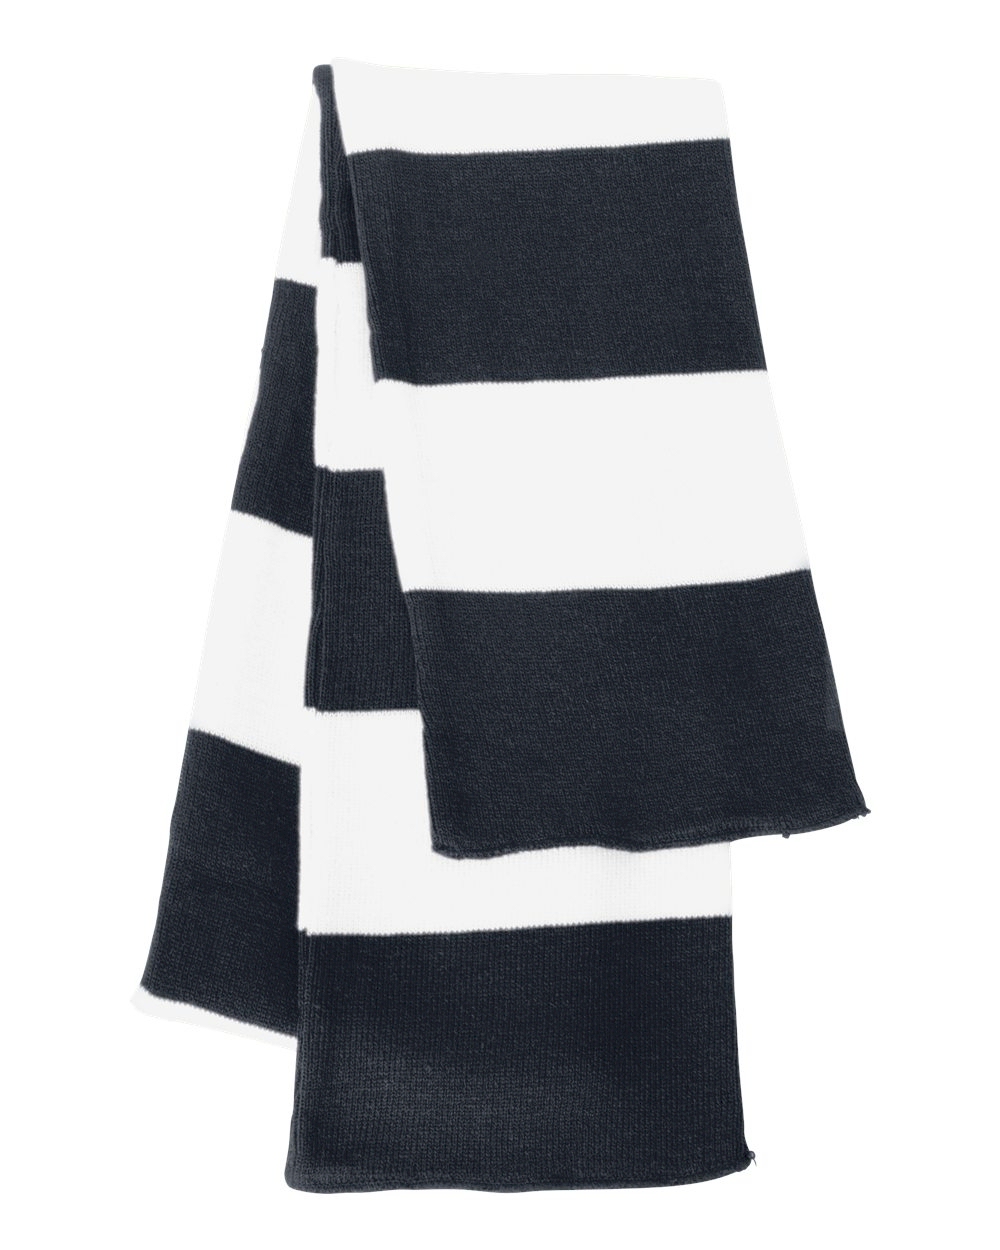 Rugby Striped Knit Scarf Embroidery Blanks - NAVY/WHITE